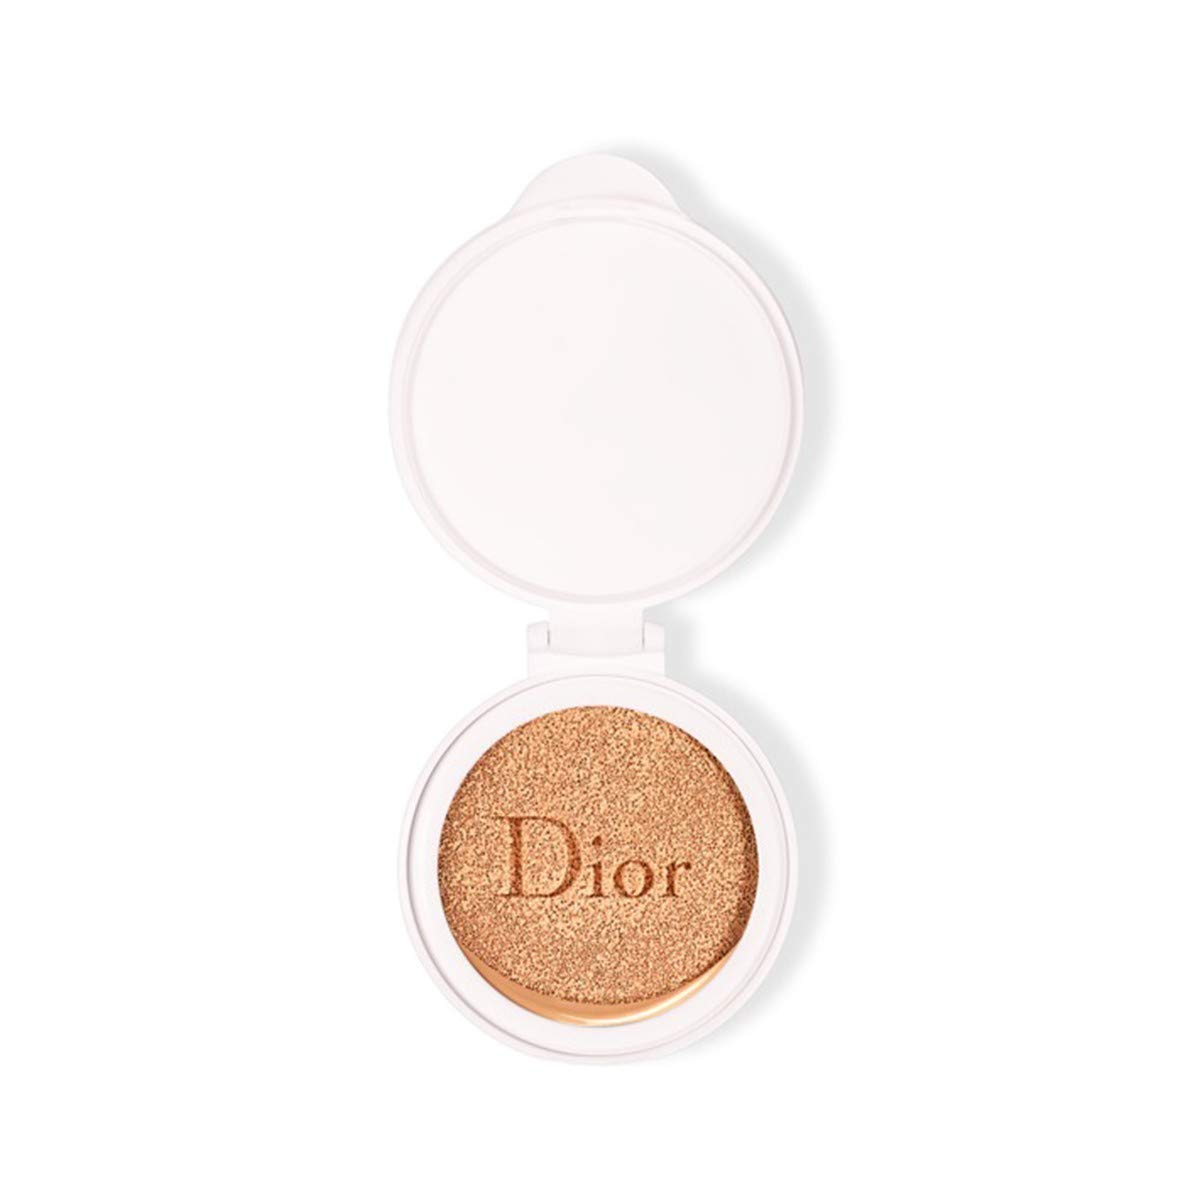 Dior Capture Totale Dreamskin Moist & Perfect Cushion Recharge 025 15 g